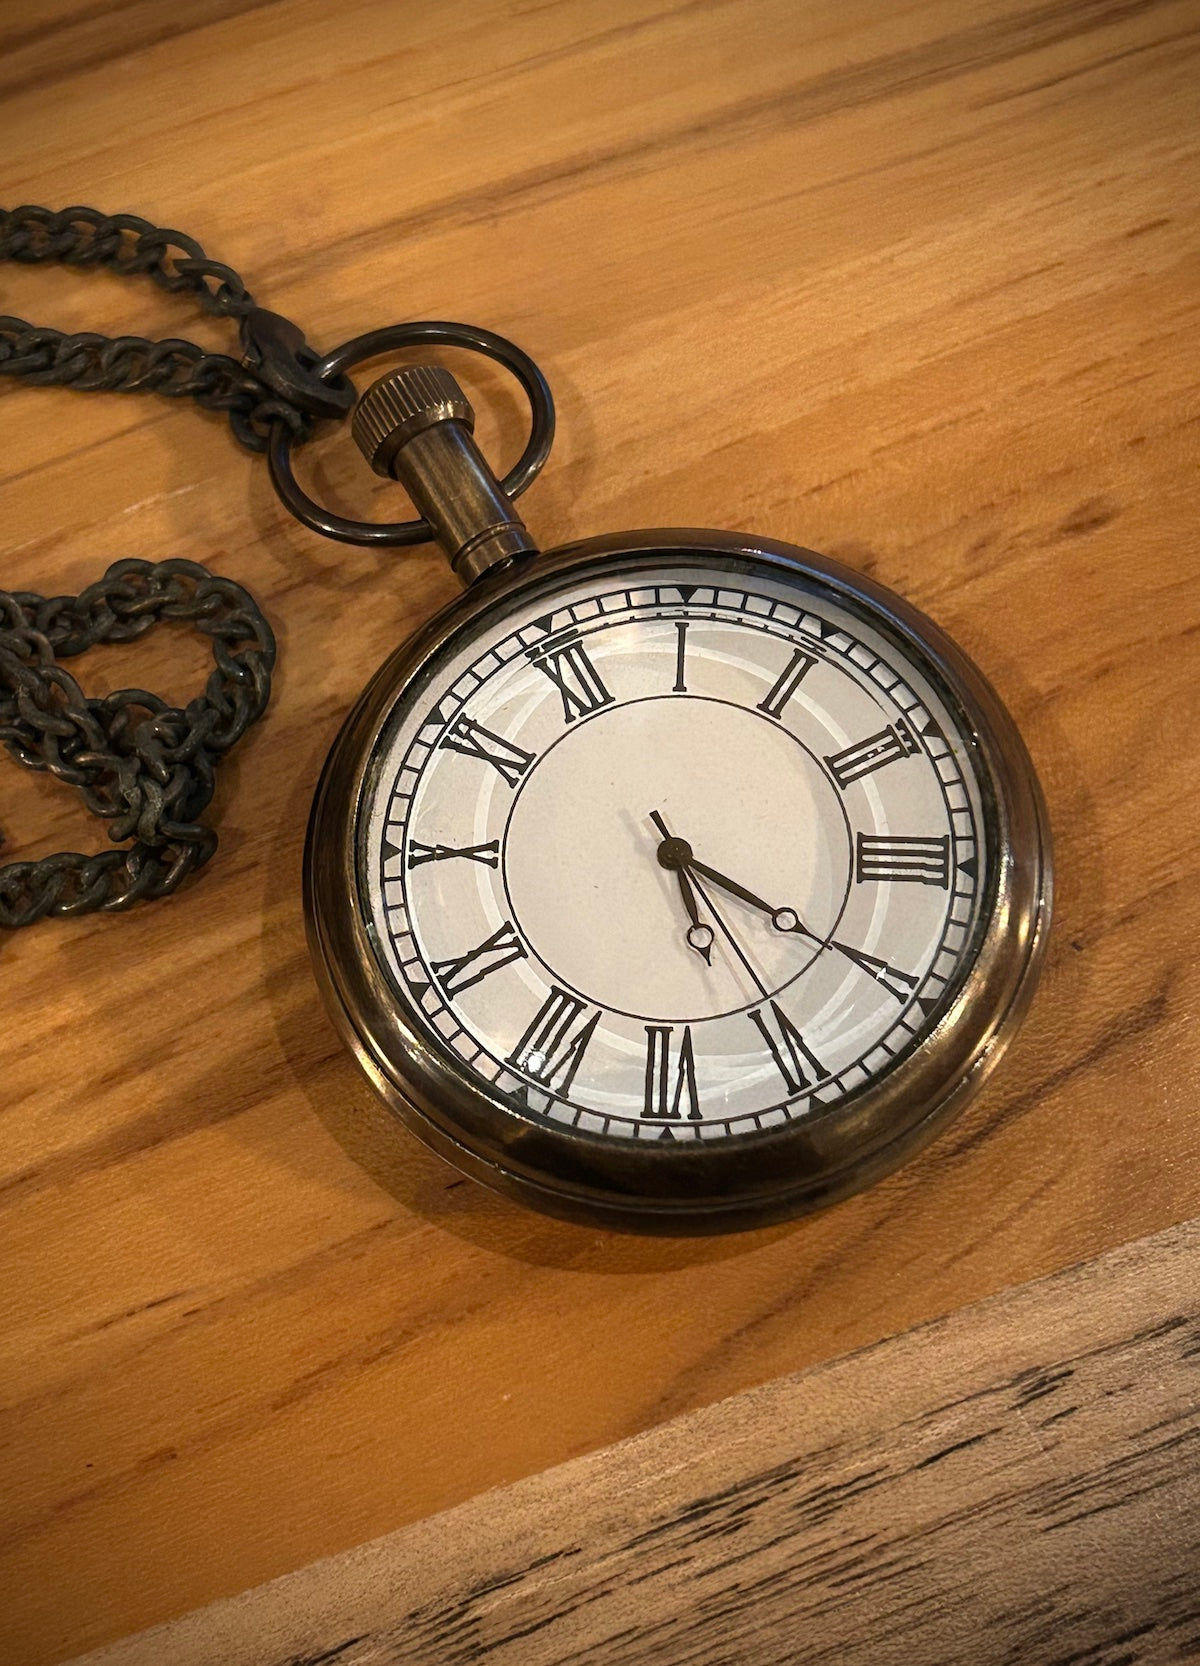 Antiqued Brass Pocket Watch in Wood Box